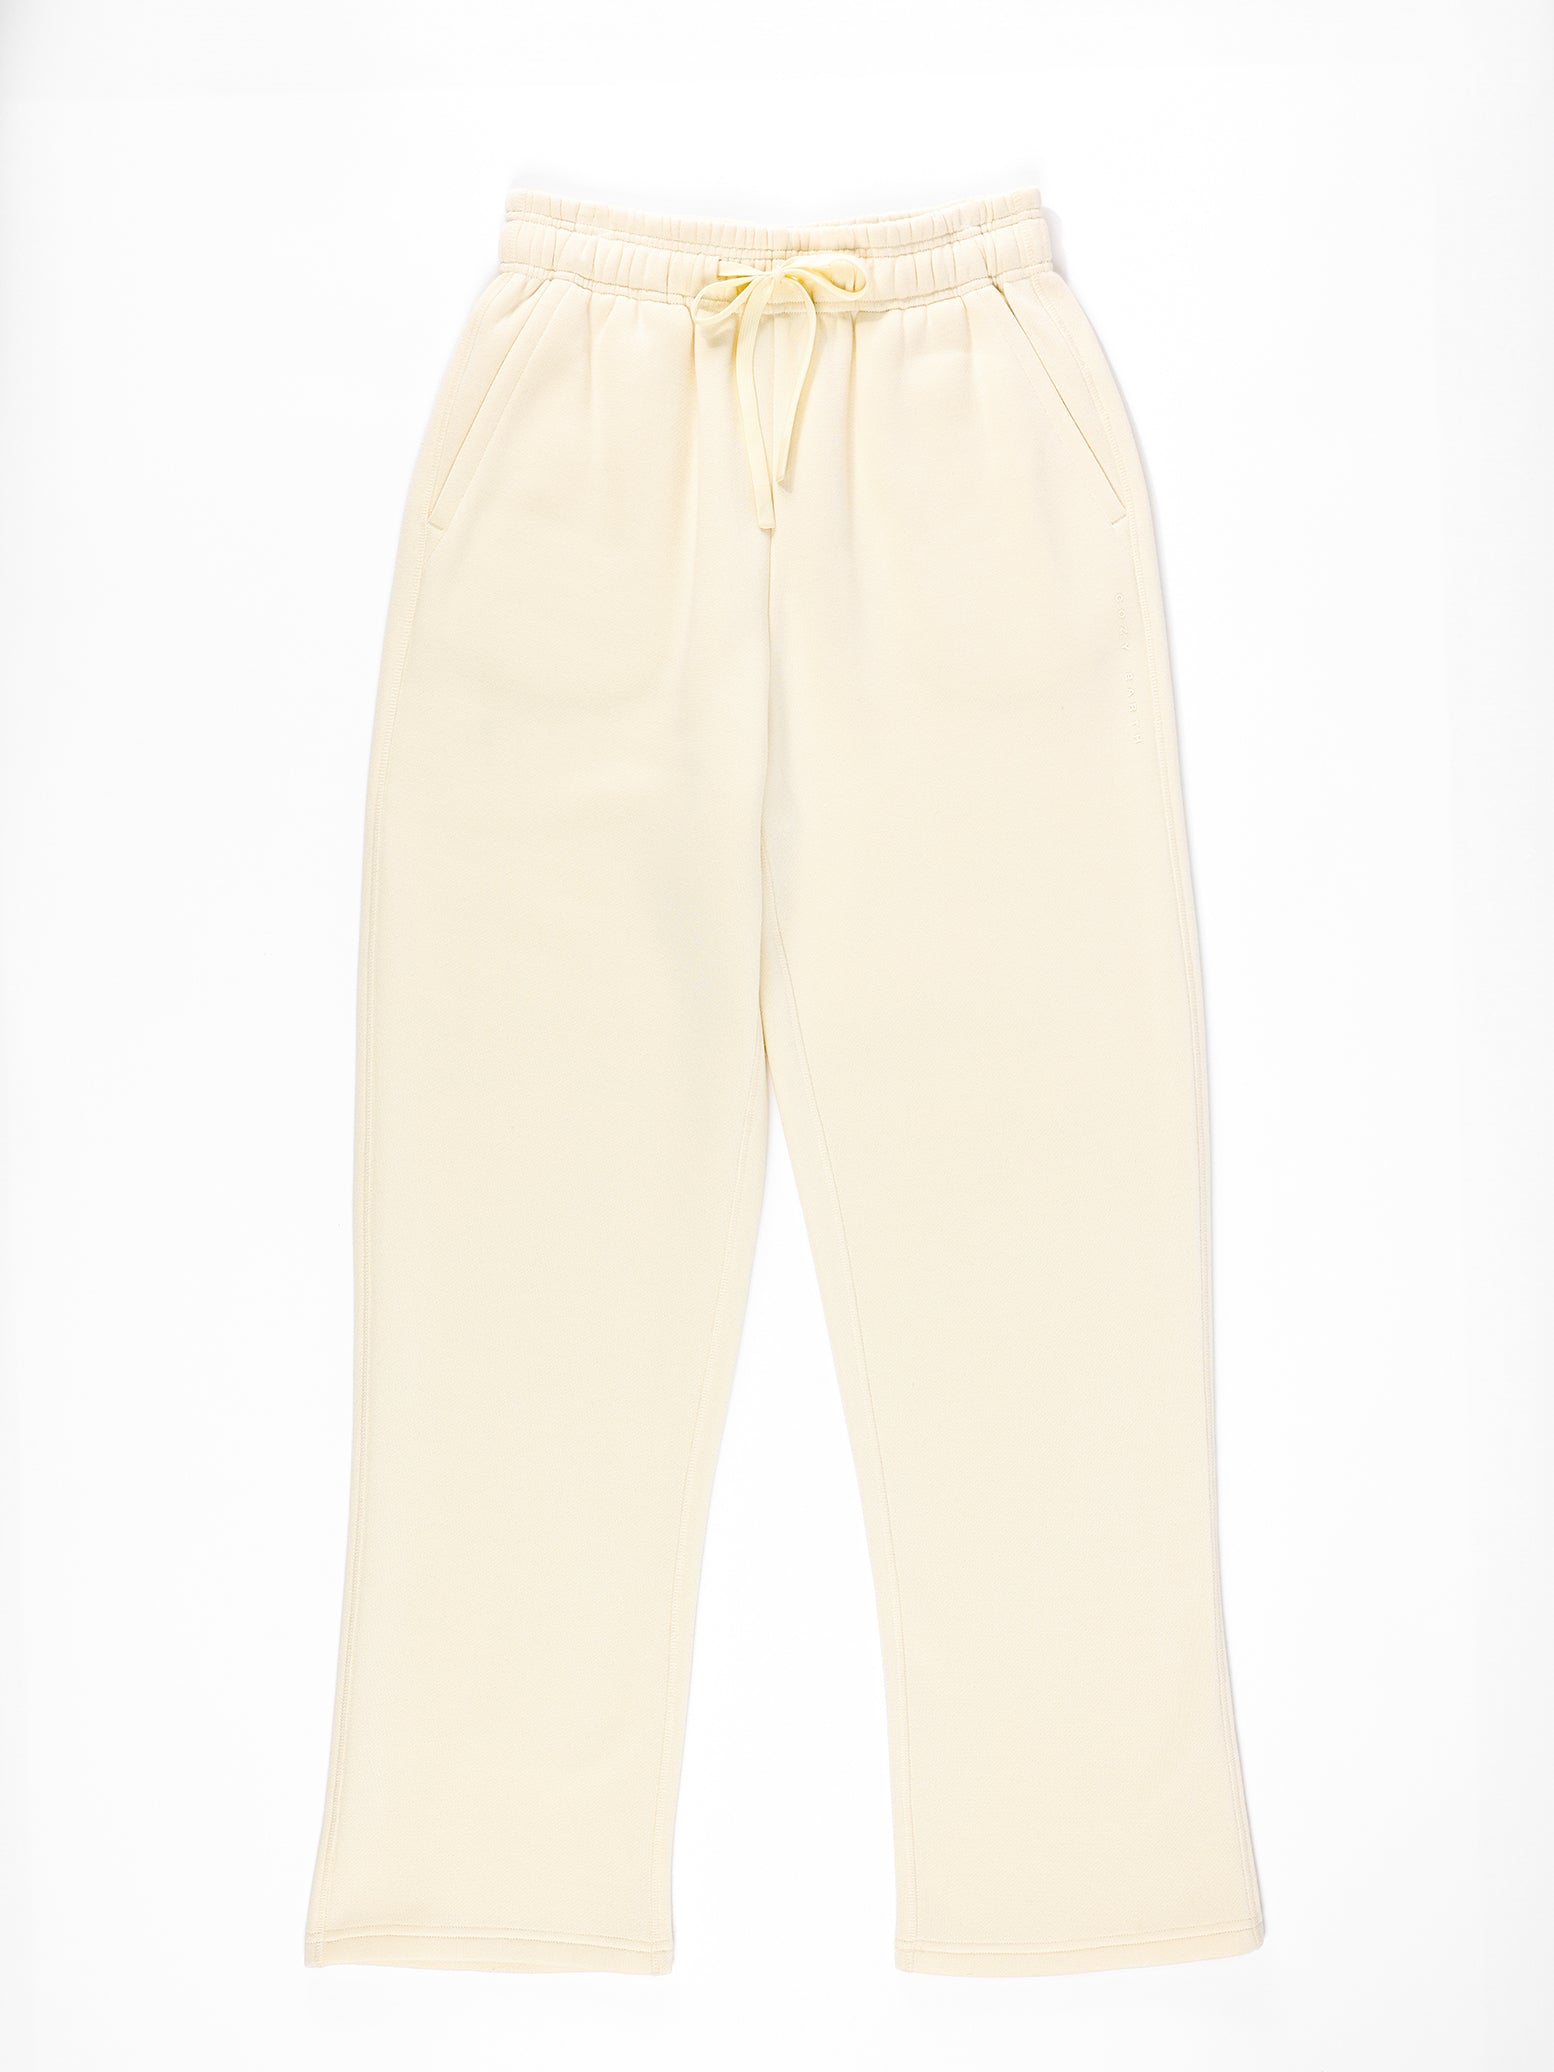 Alabaster CityScape Wide Leg Pant with white background 